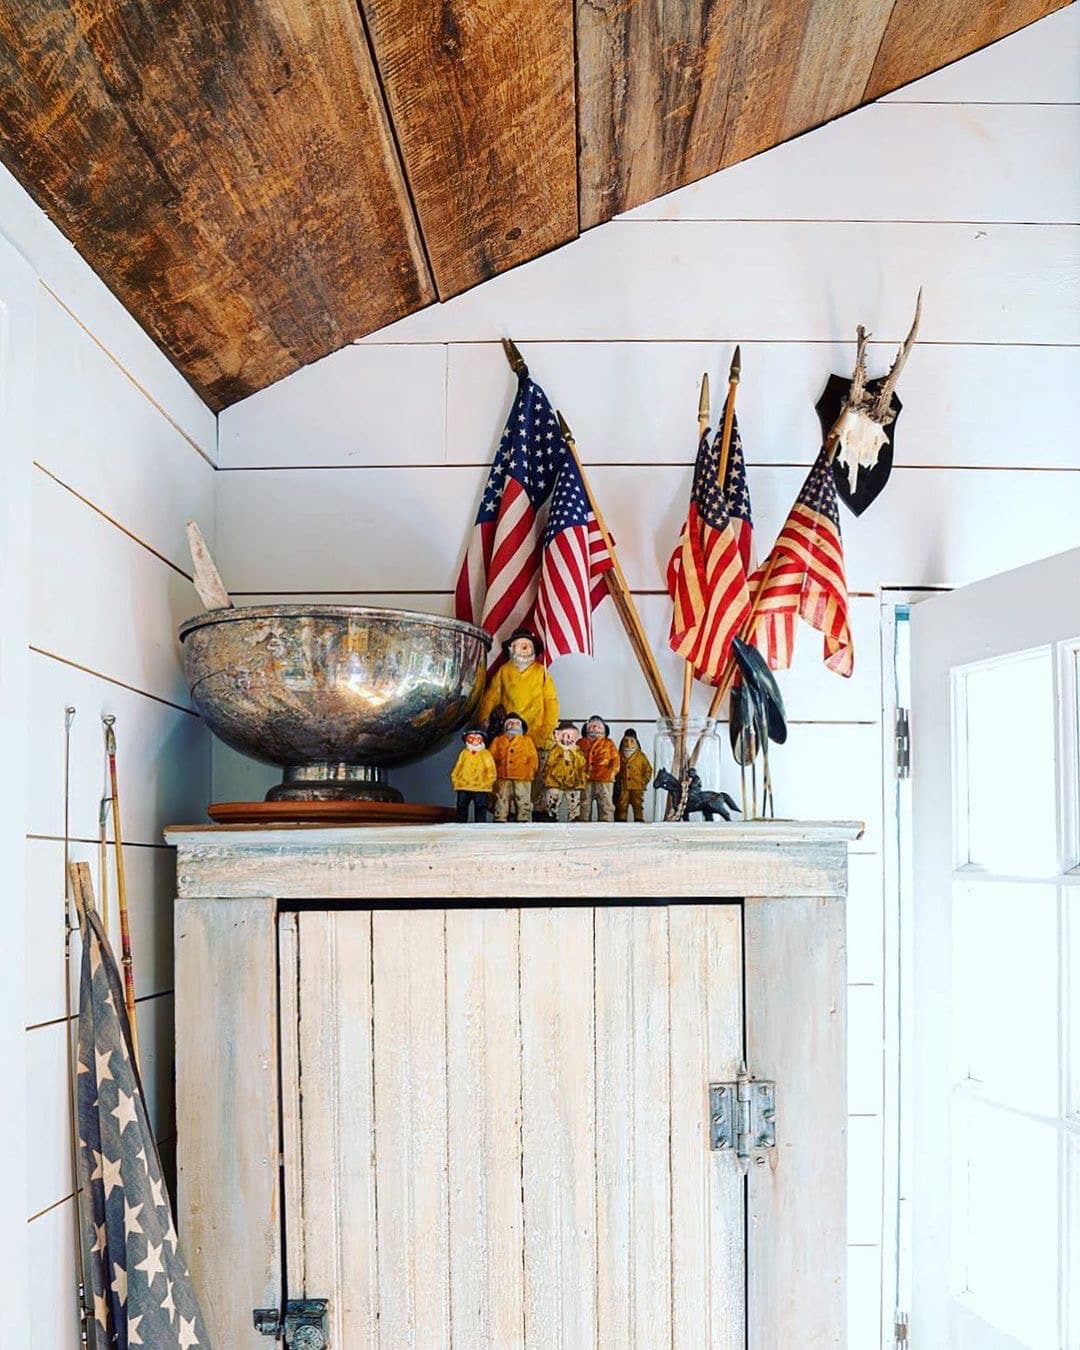 Flags in Decor + Memorial Day Weekend